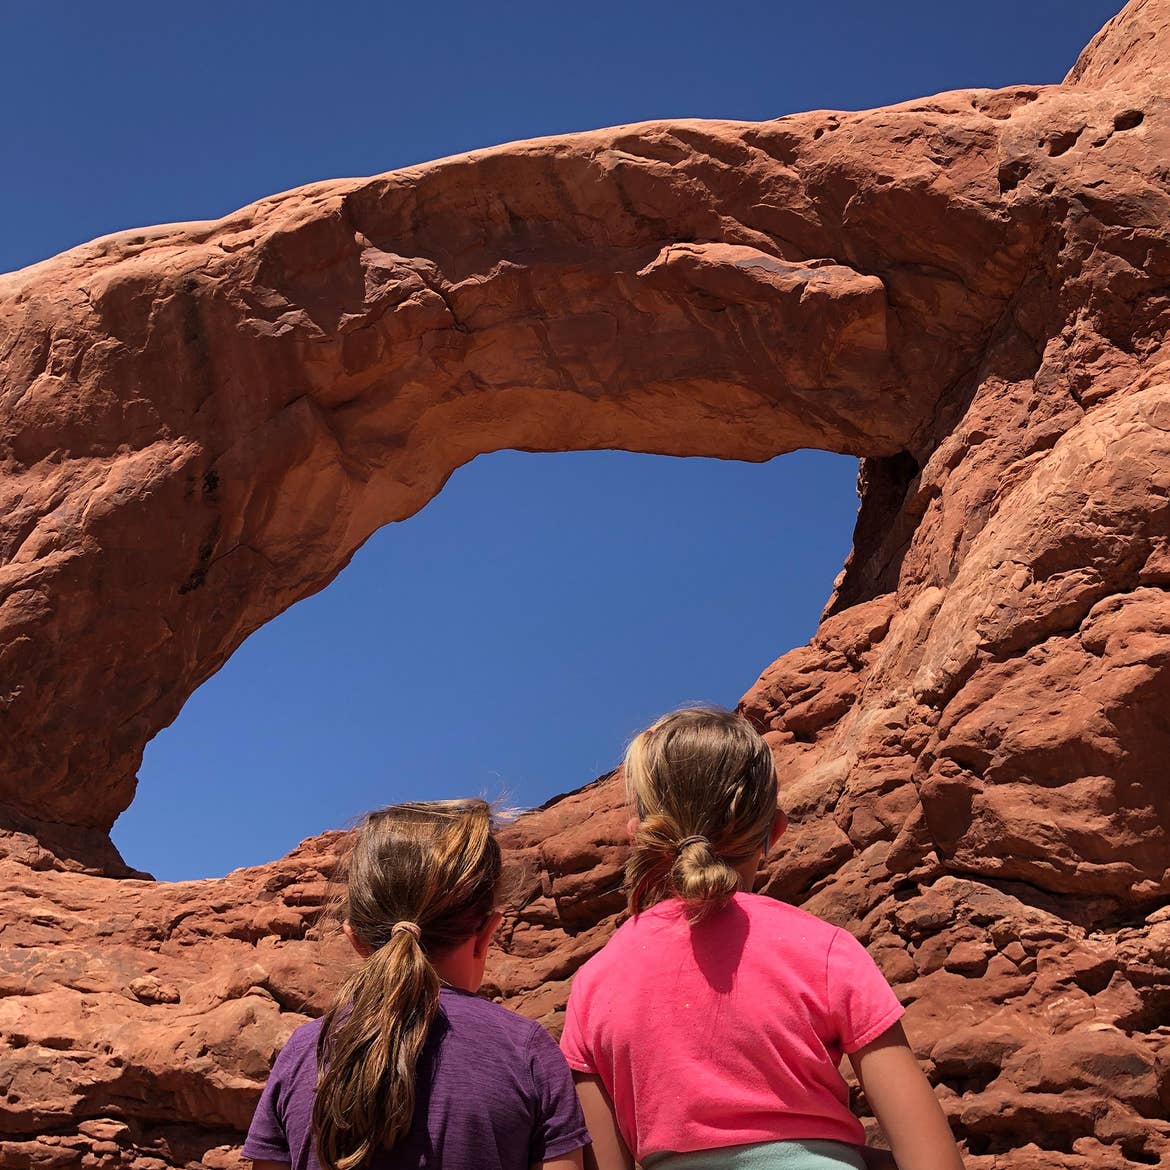 Kyndall and Kyler stand in front of the Delicate Arch.